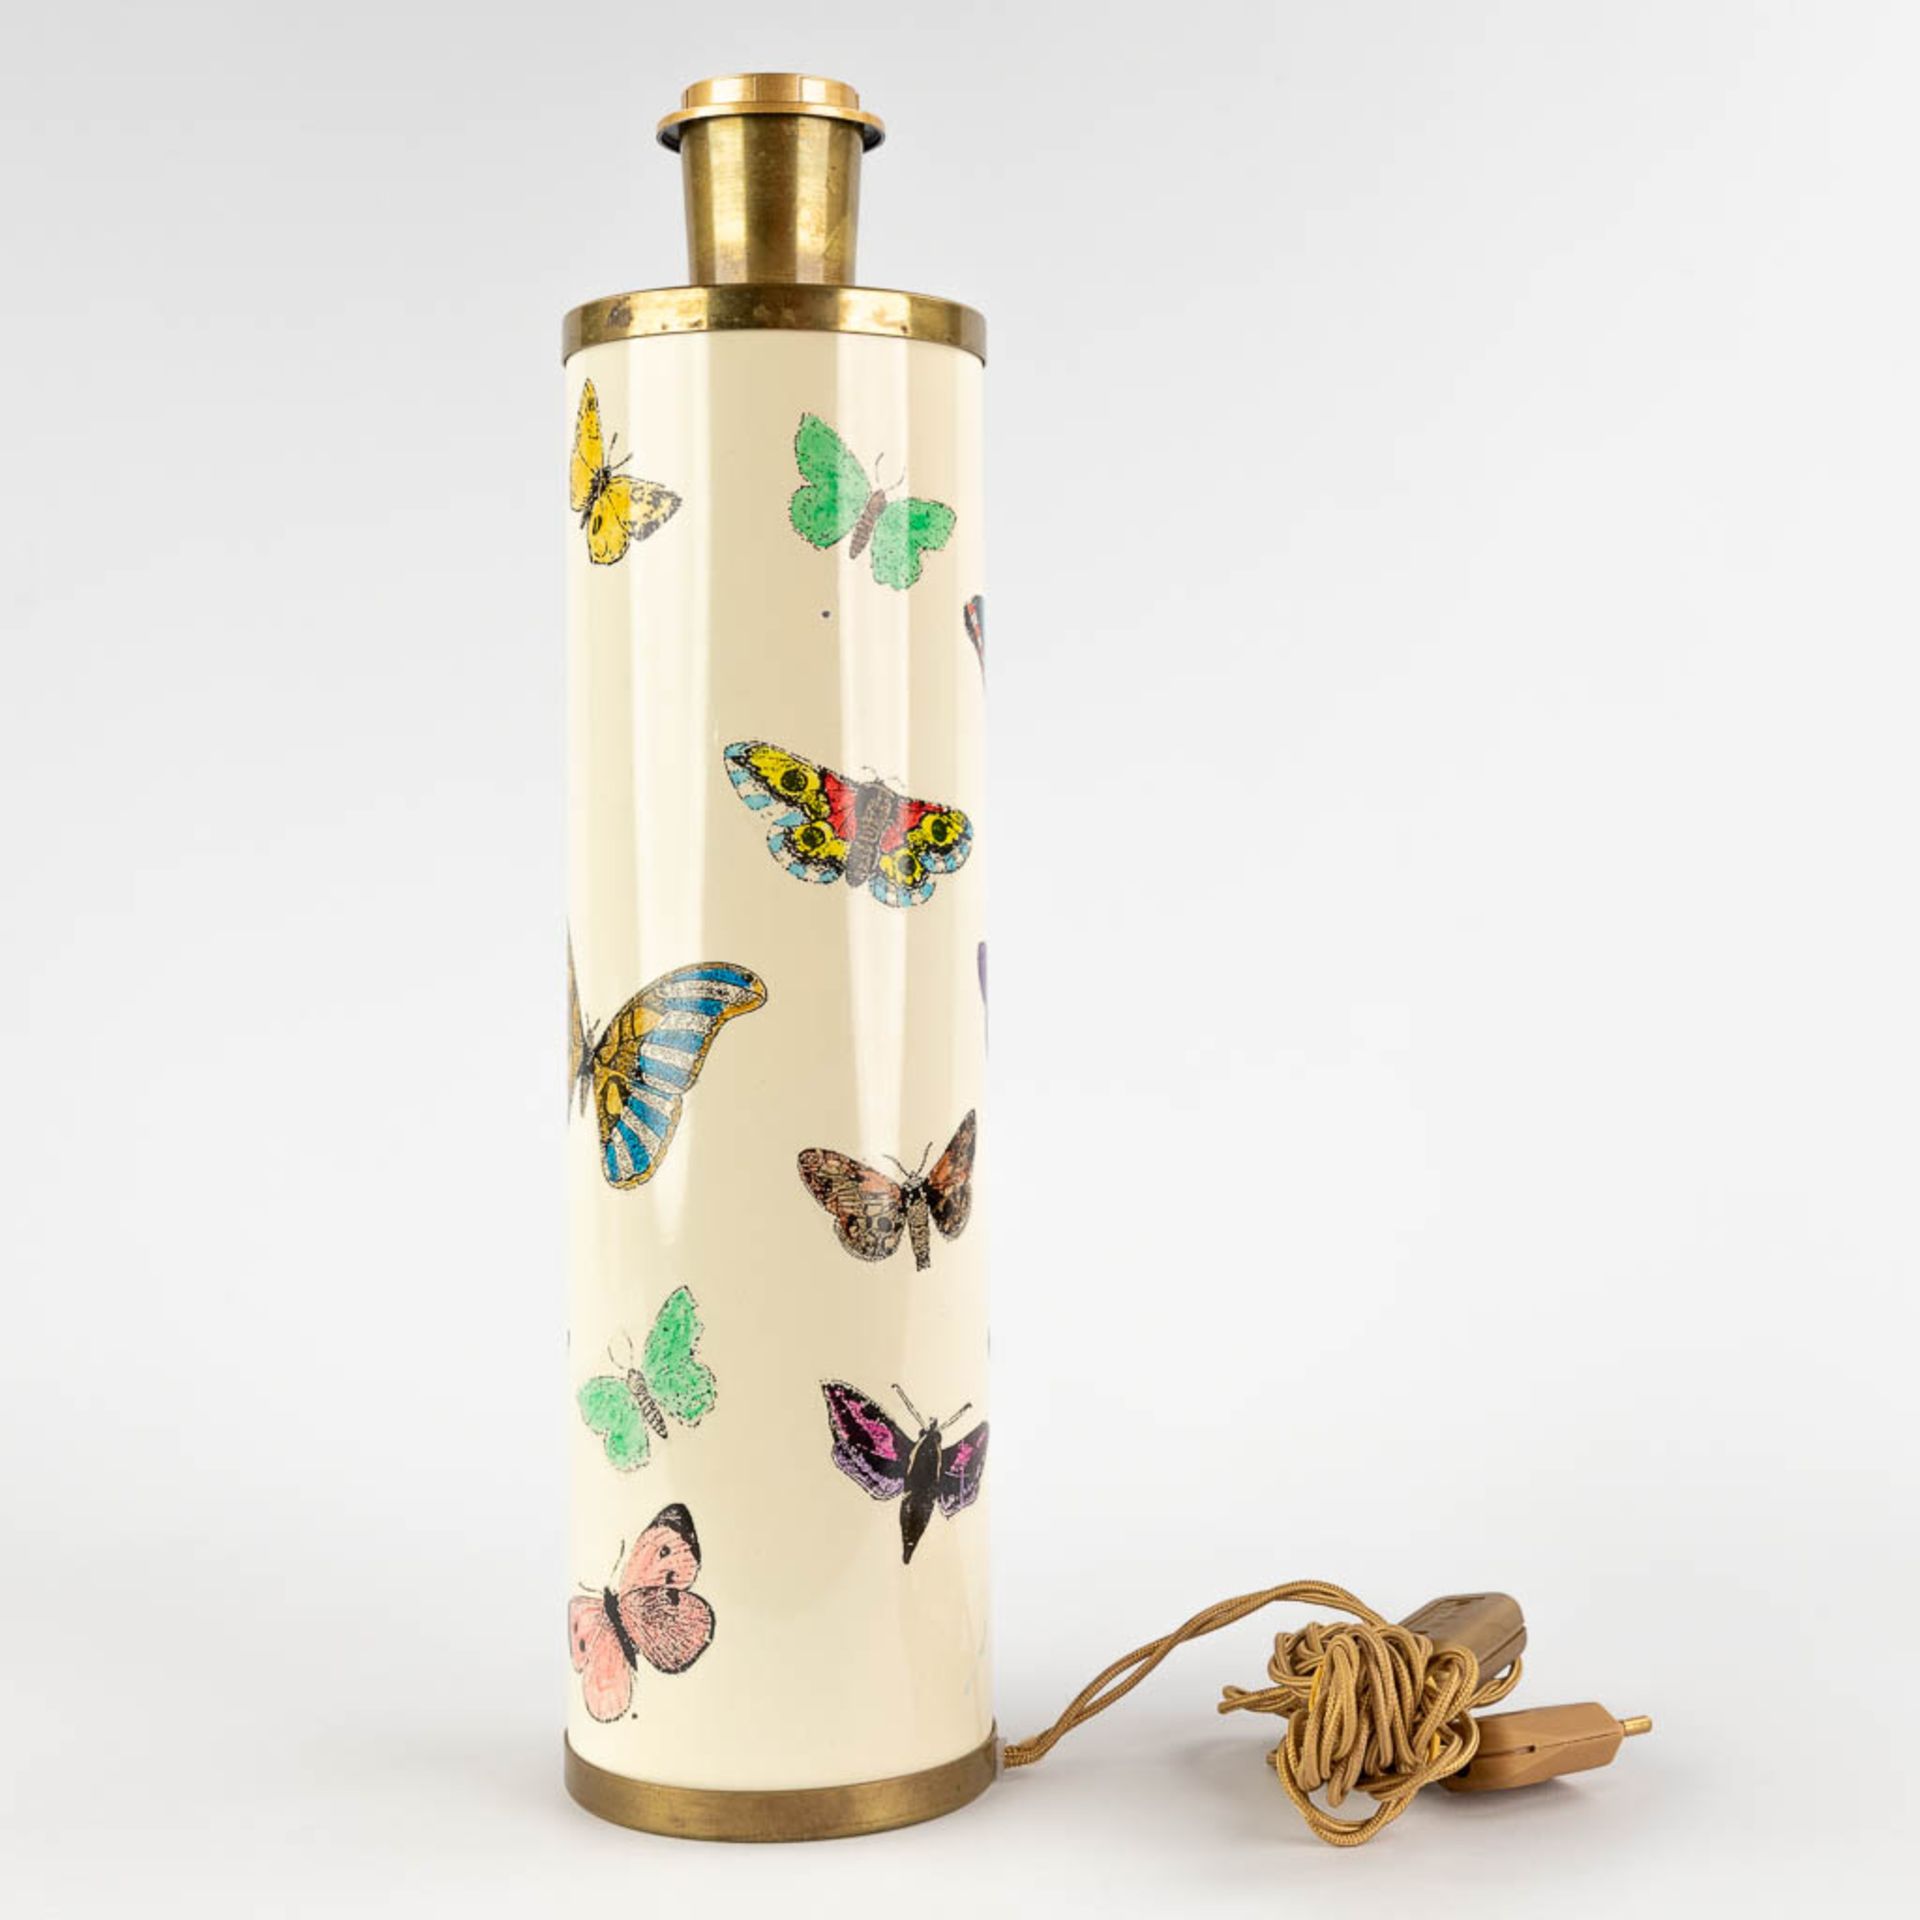 Piero FORNASETTI (1913-1988) 'Farfalla', table lamp with butterfly decor. (H:41 x D:10,5 cm) - Image 3 of 11